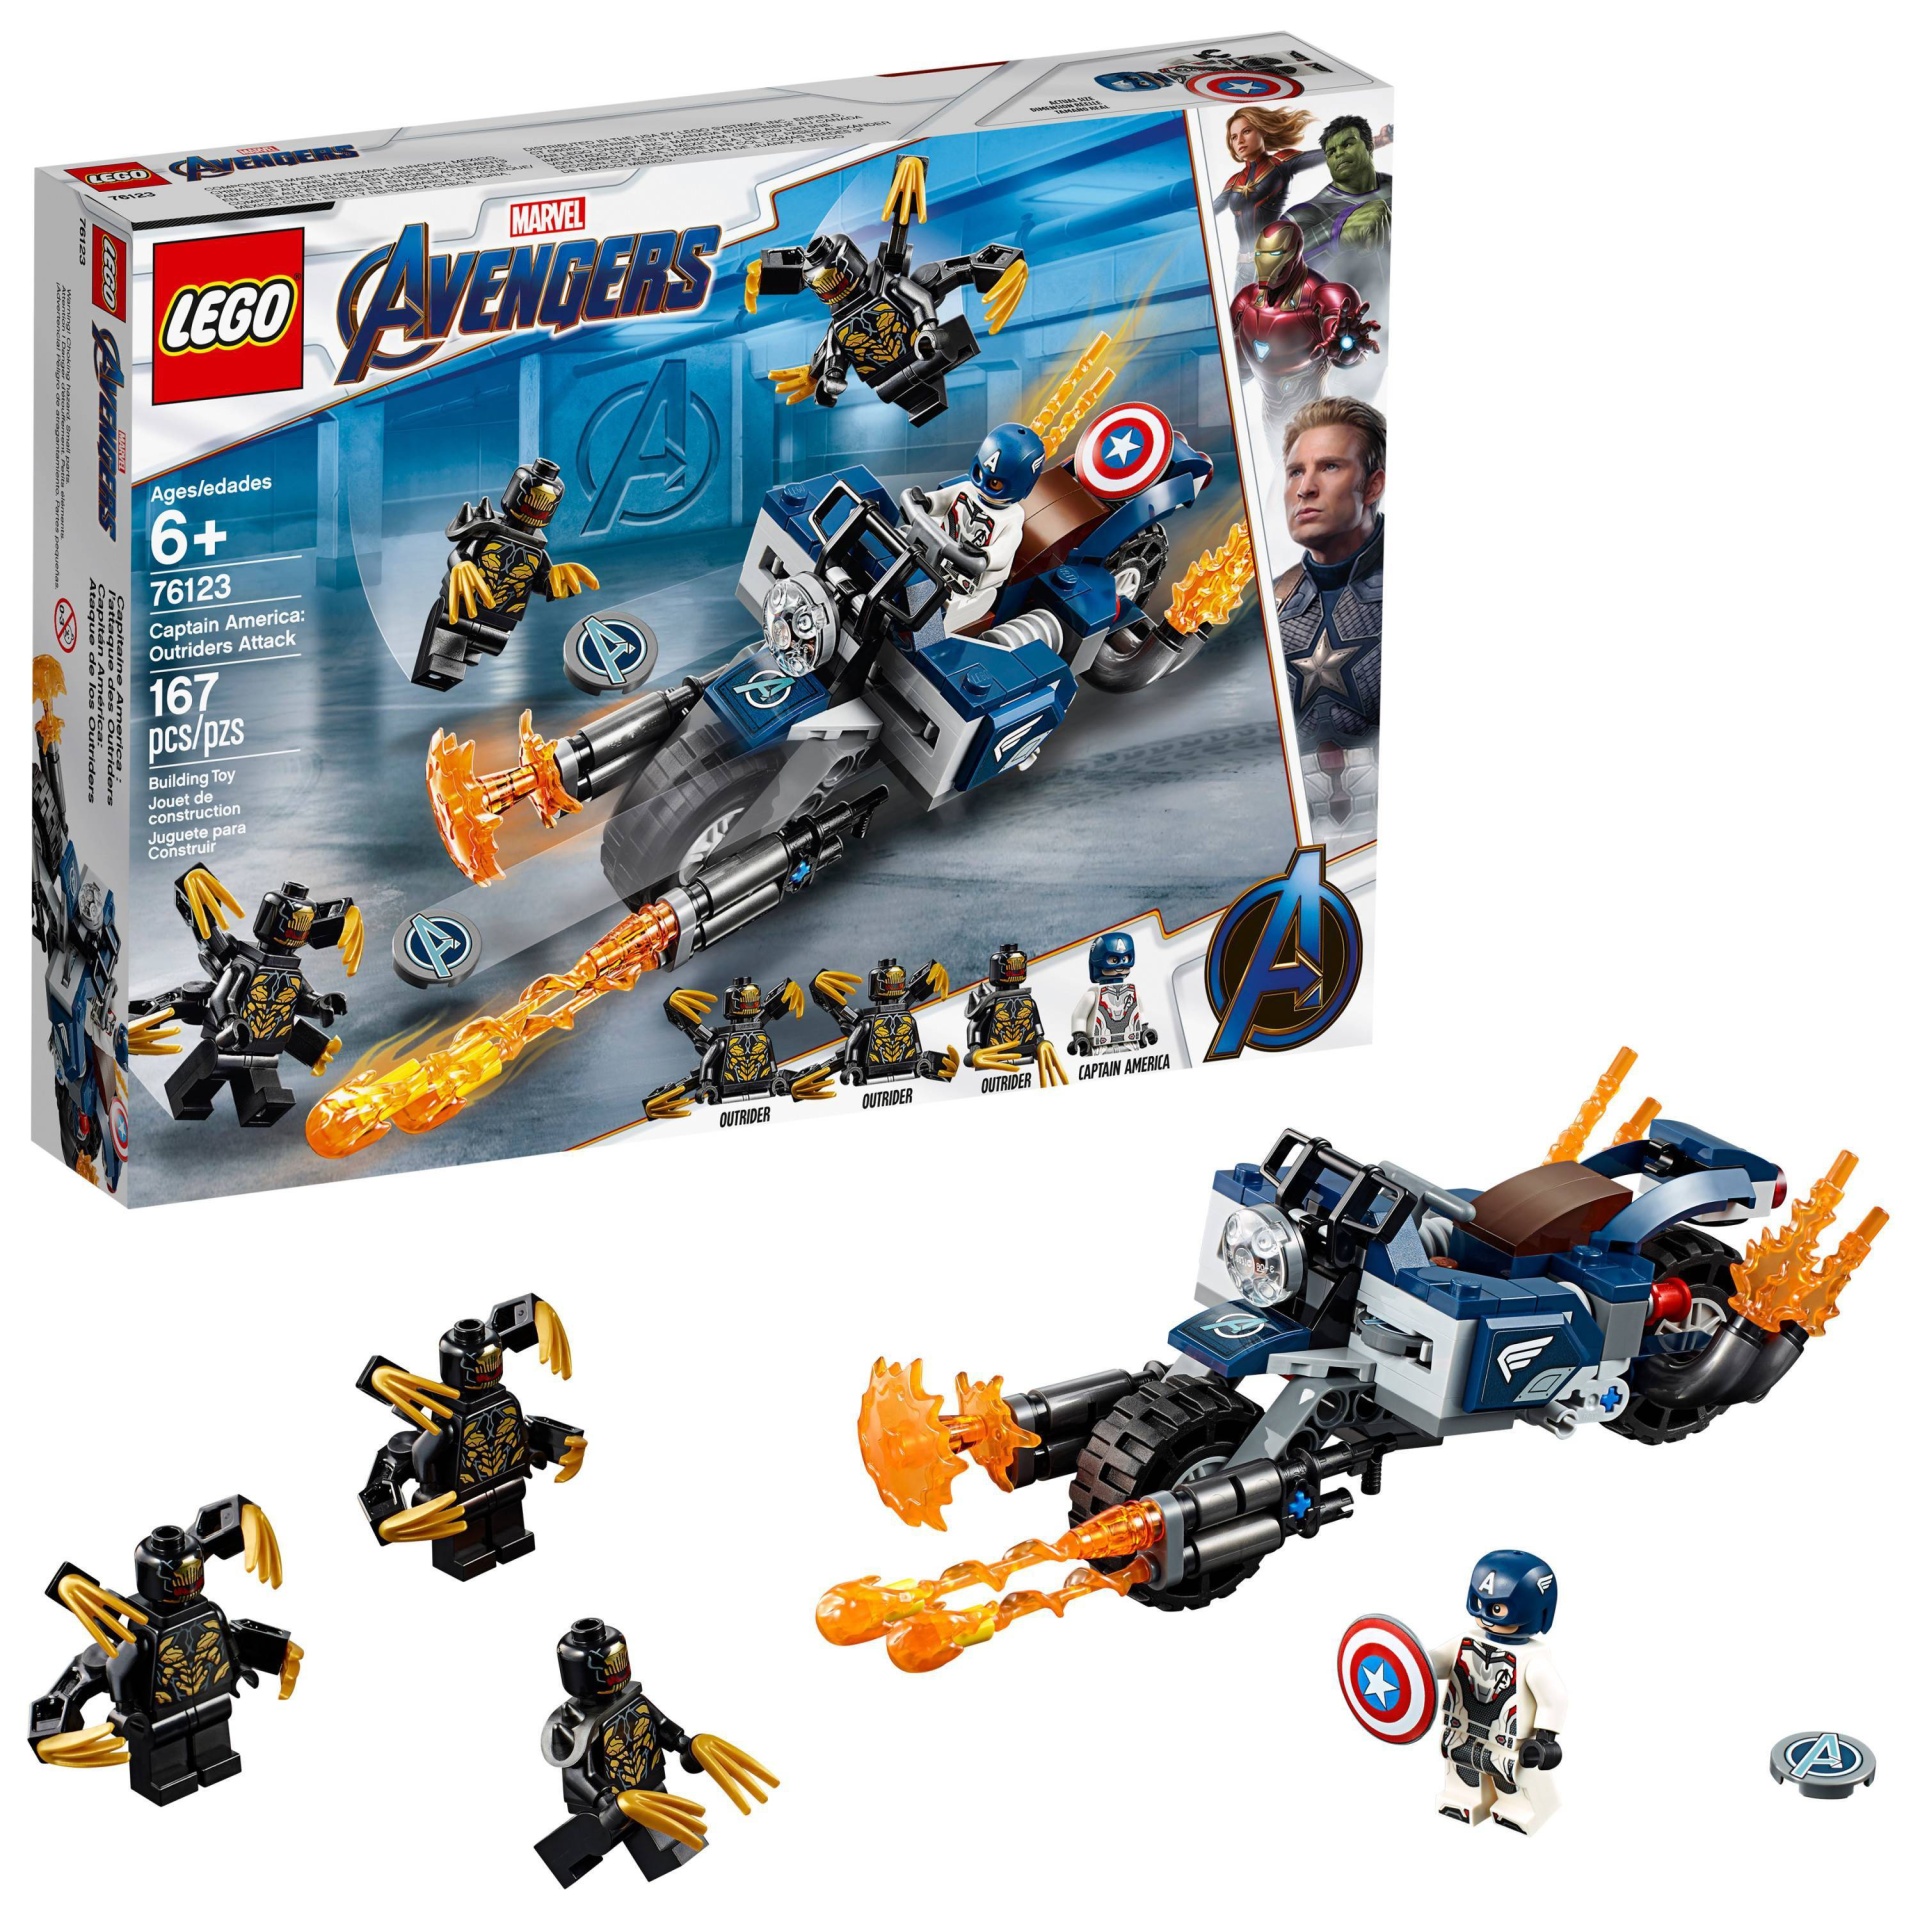 slide 1 of 7, LEGO Super Heroes Marvel Avengers Movie 4 Captain America: Outriders Attack 76123, 1 ct